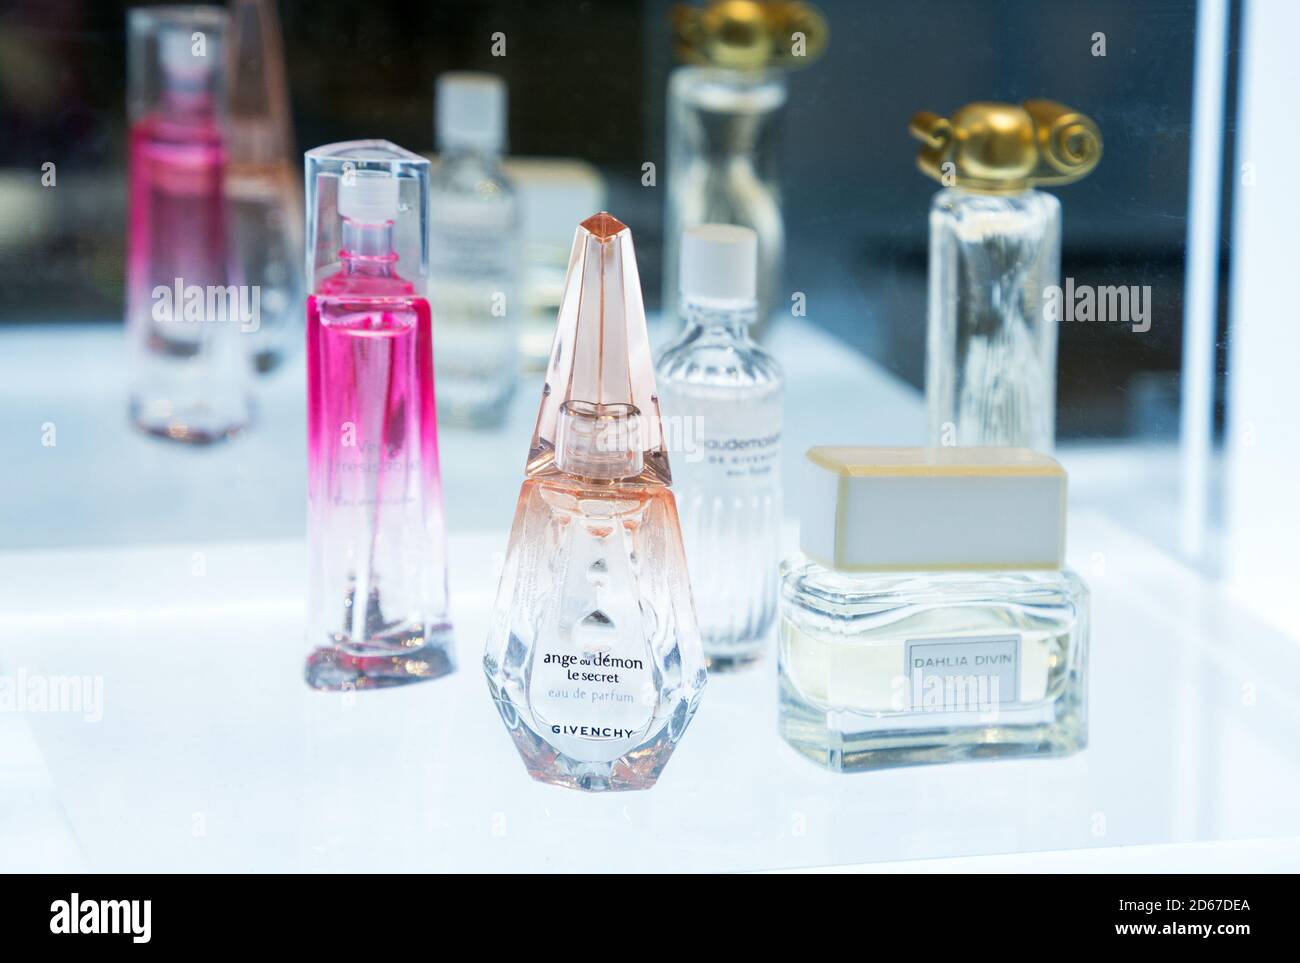 Givenchy perfume bottles on display in store Stock Photo